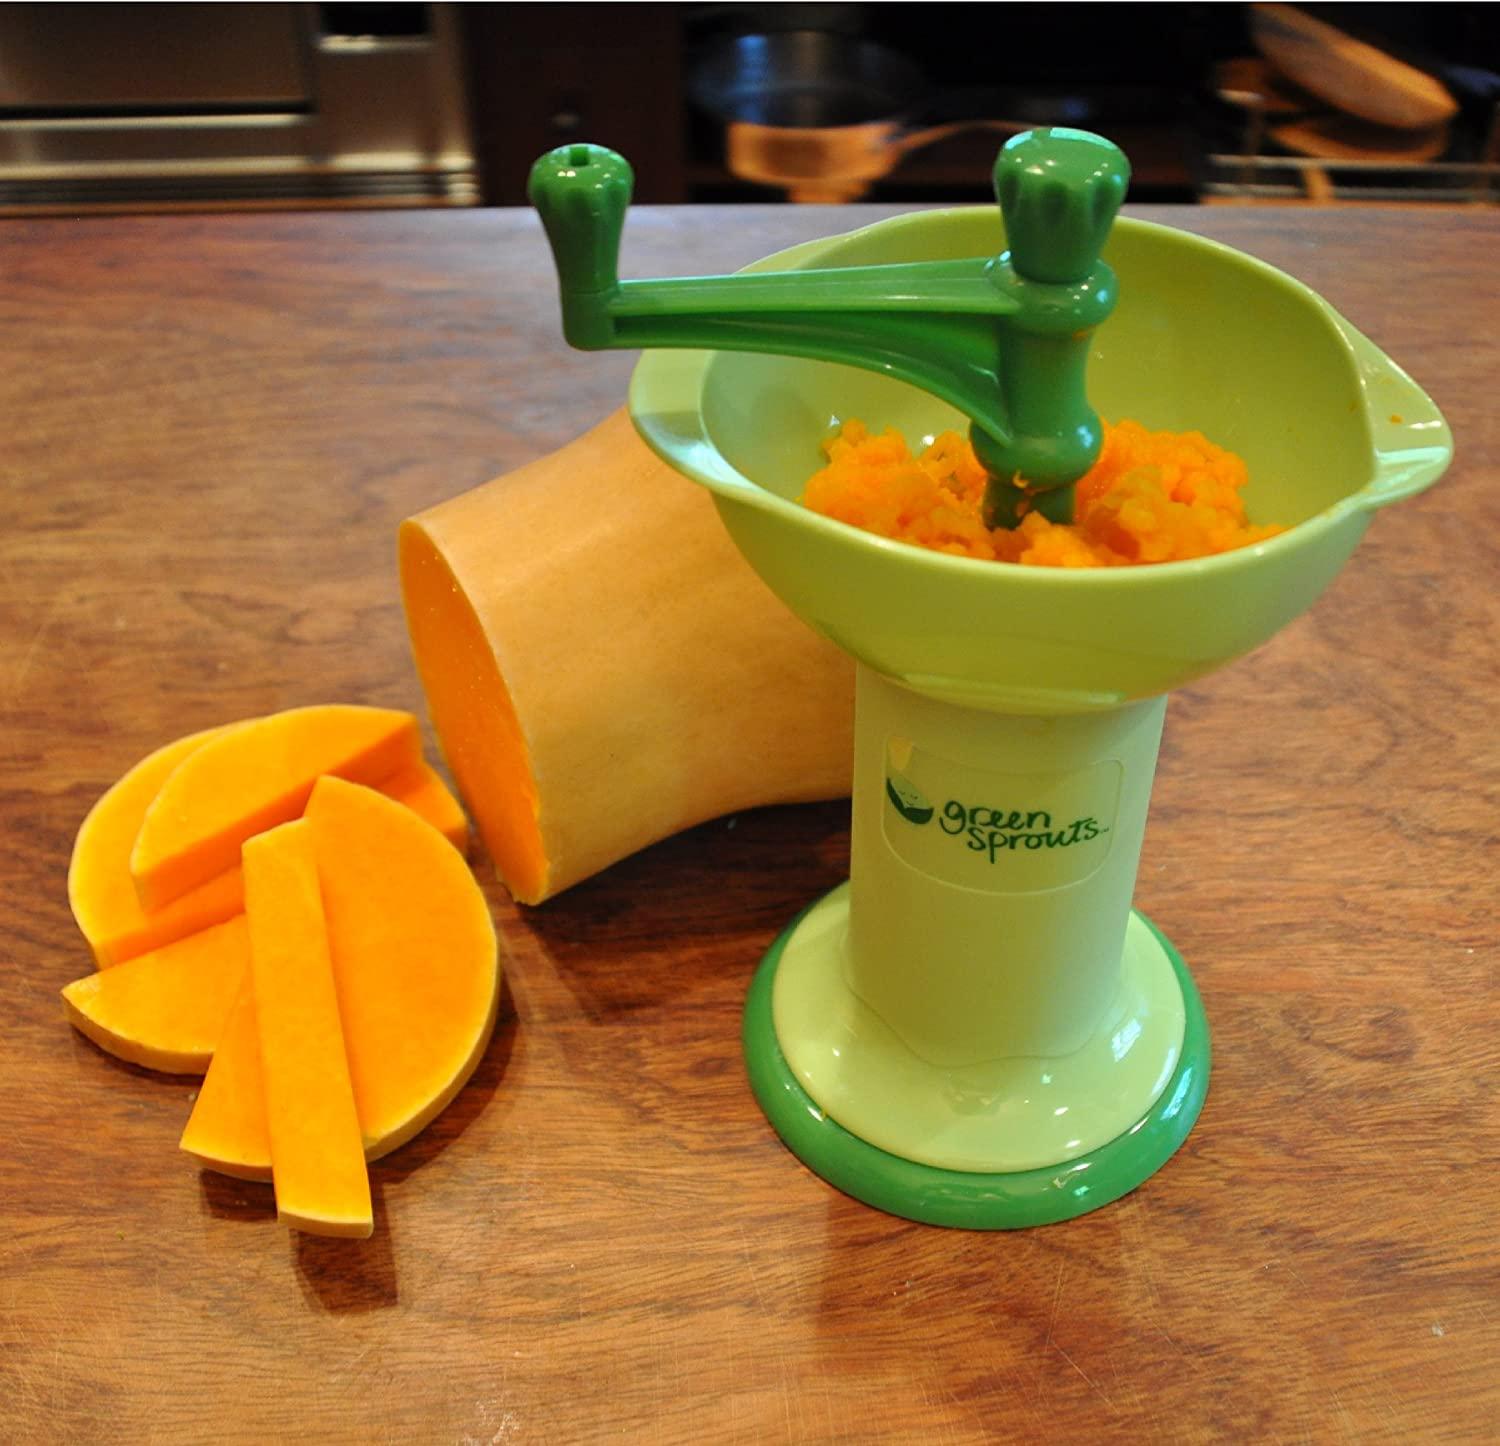  green sprouts Fresh Baby Food Mill - Easily Purees Food for Baby,  Separates Seeds & Skins, Compact Size, No Batteries or Electricity Needed,  Dishwasher Safe : Baby